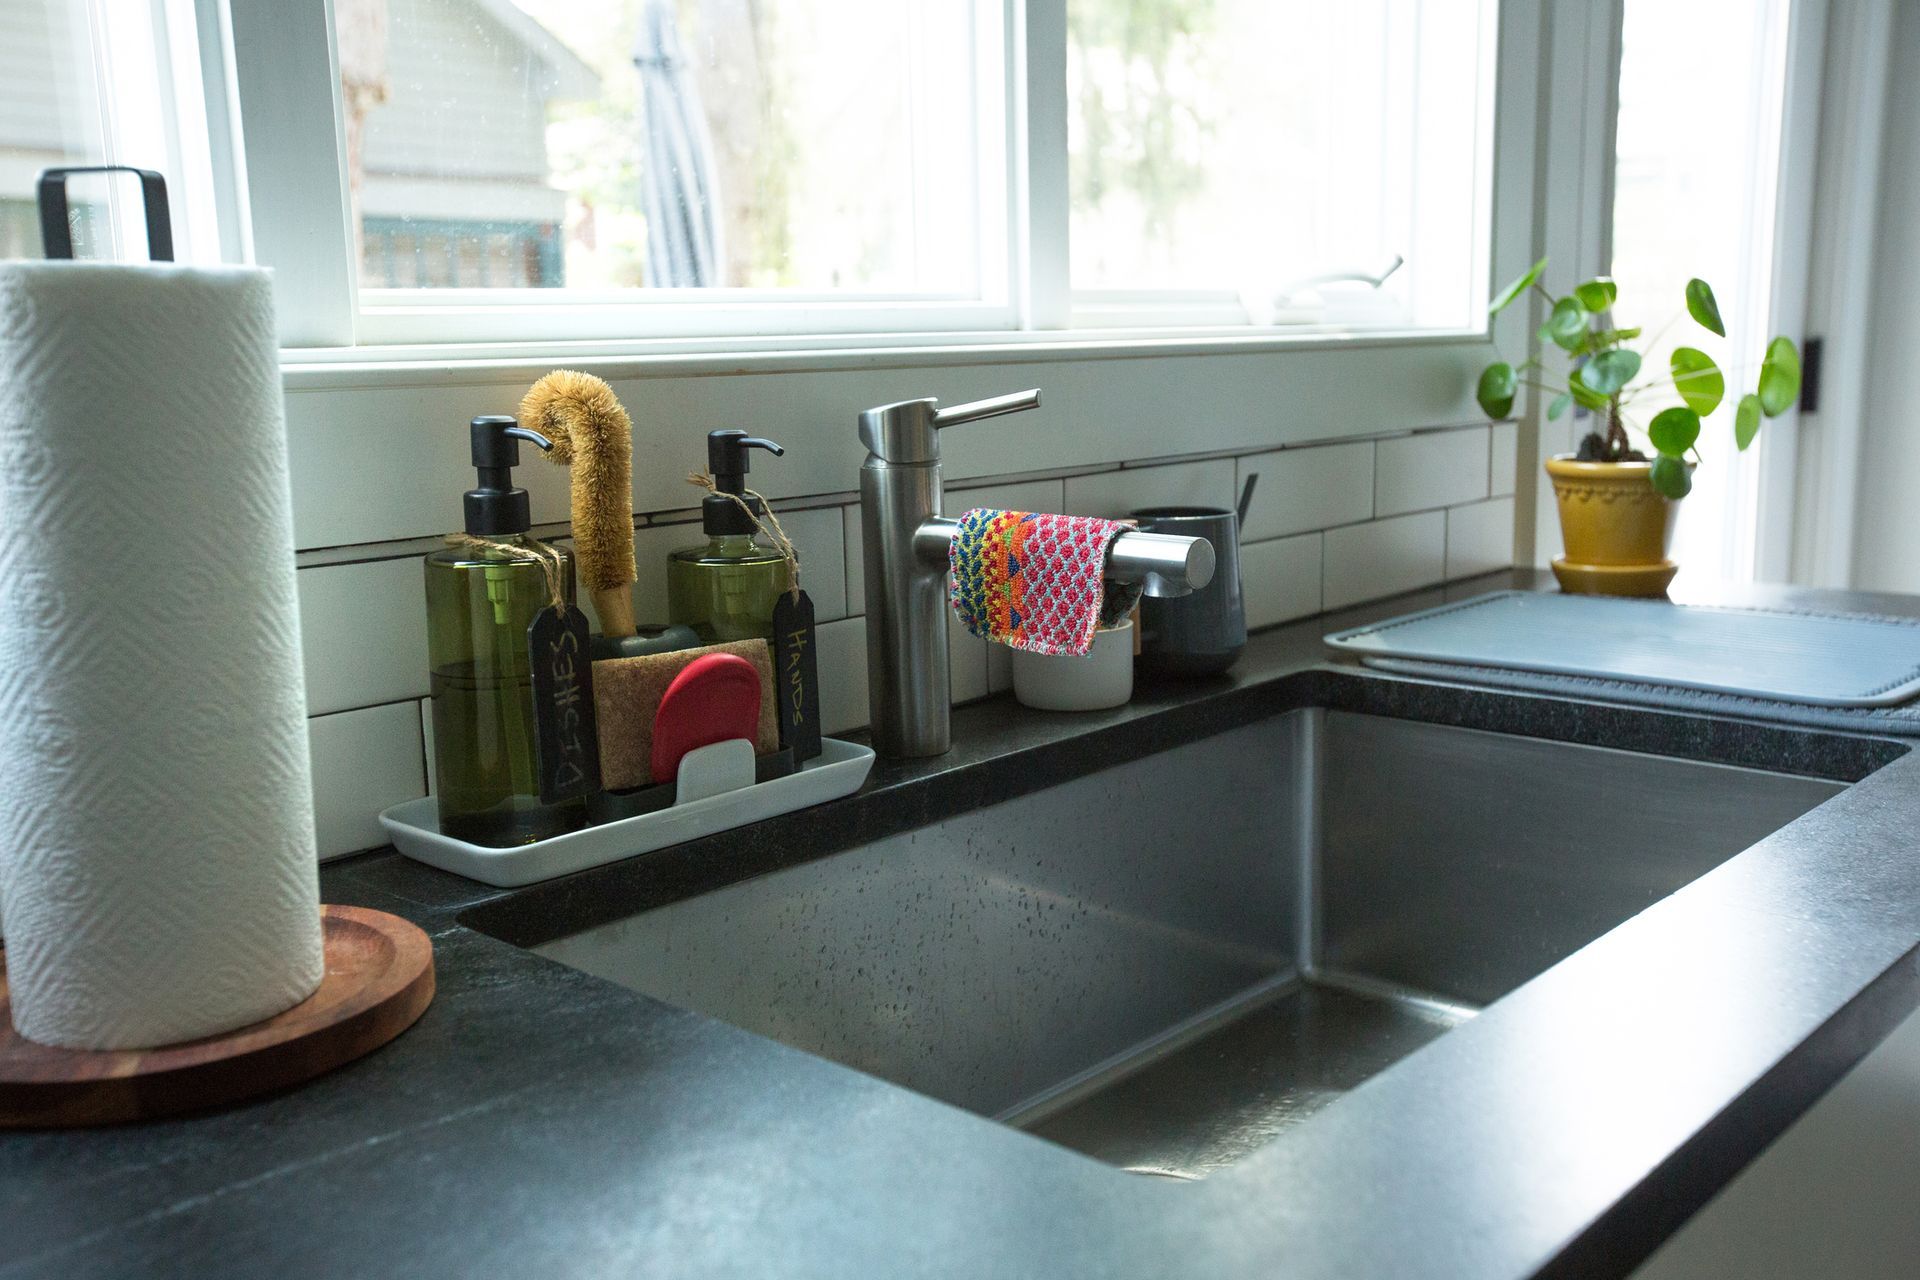 A Kitchen Sink With Soap Dispensers And A Paper Towel Holder | Clinton Township, MI | Touch of Class Cleaning